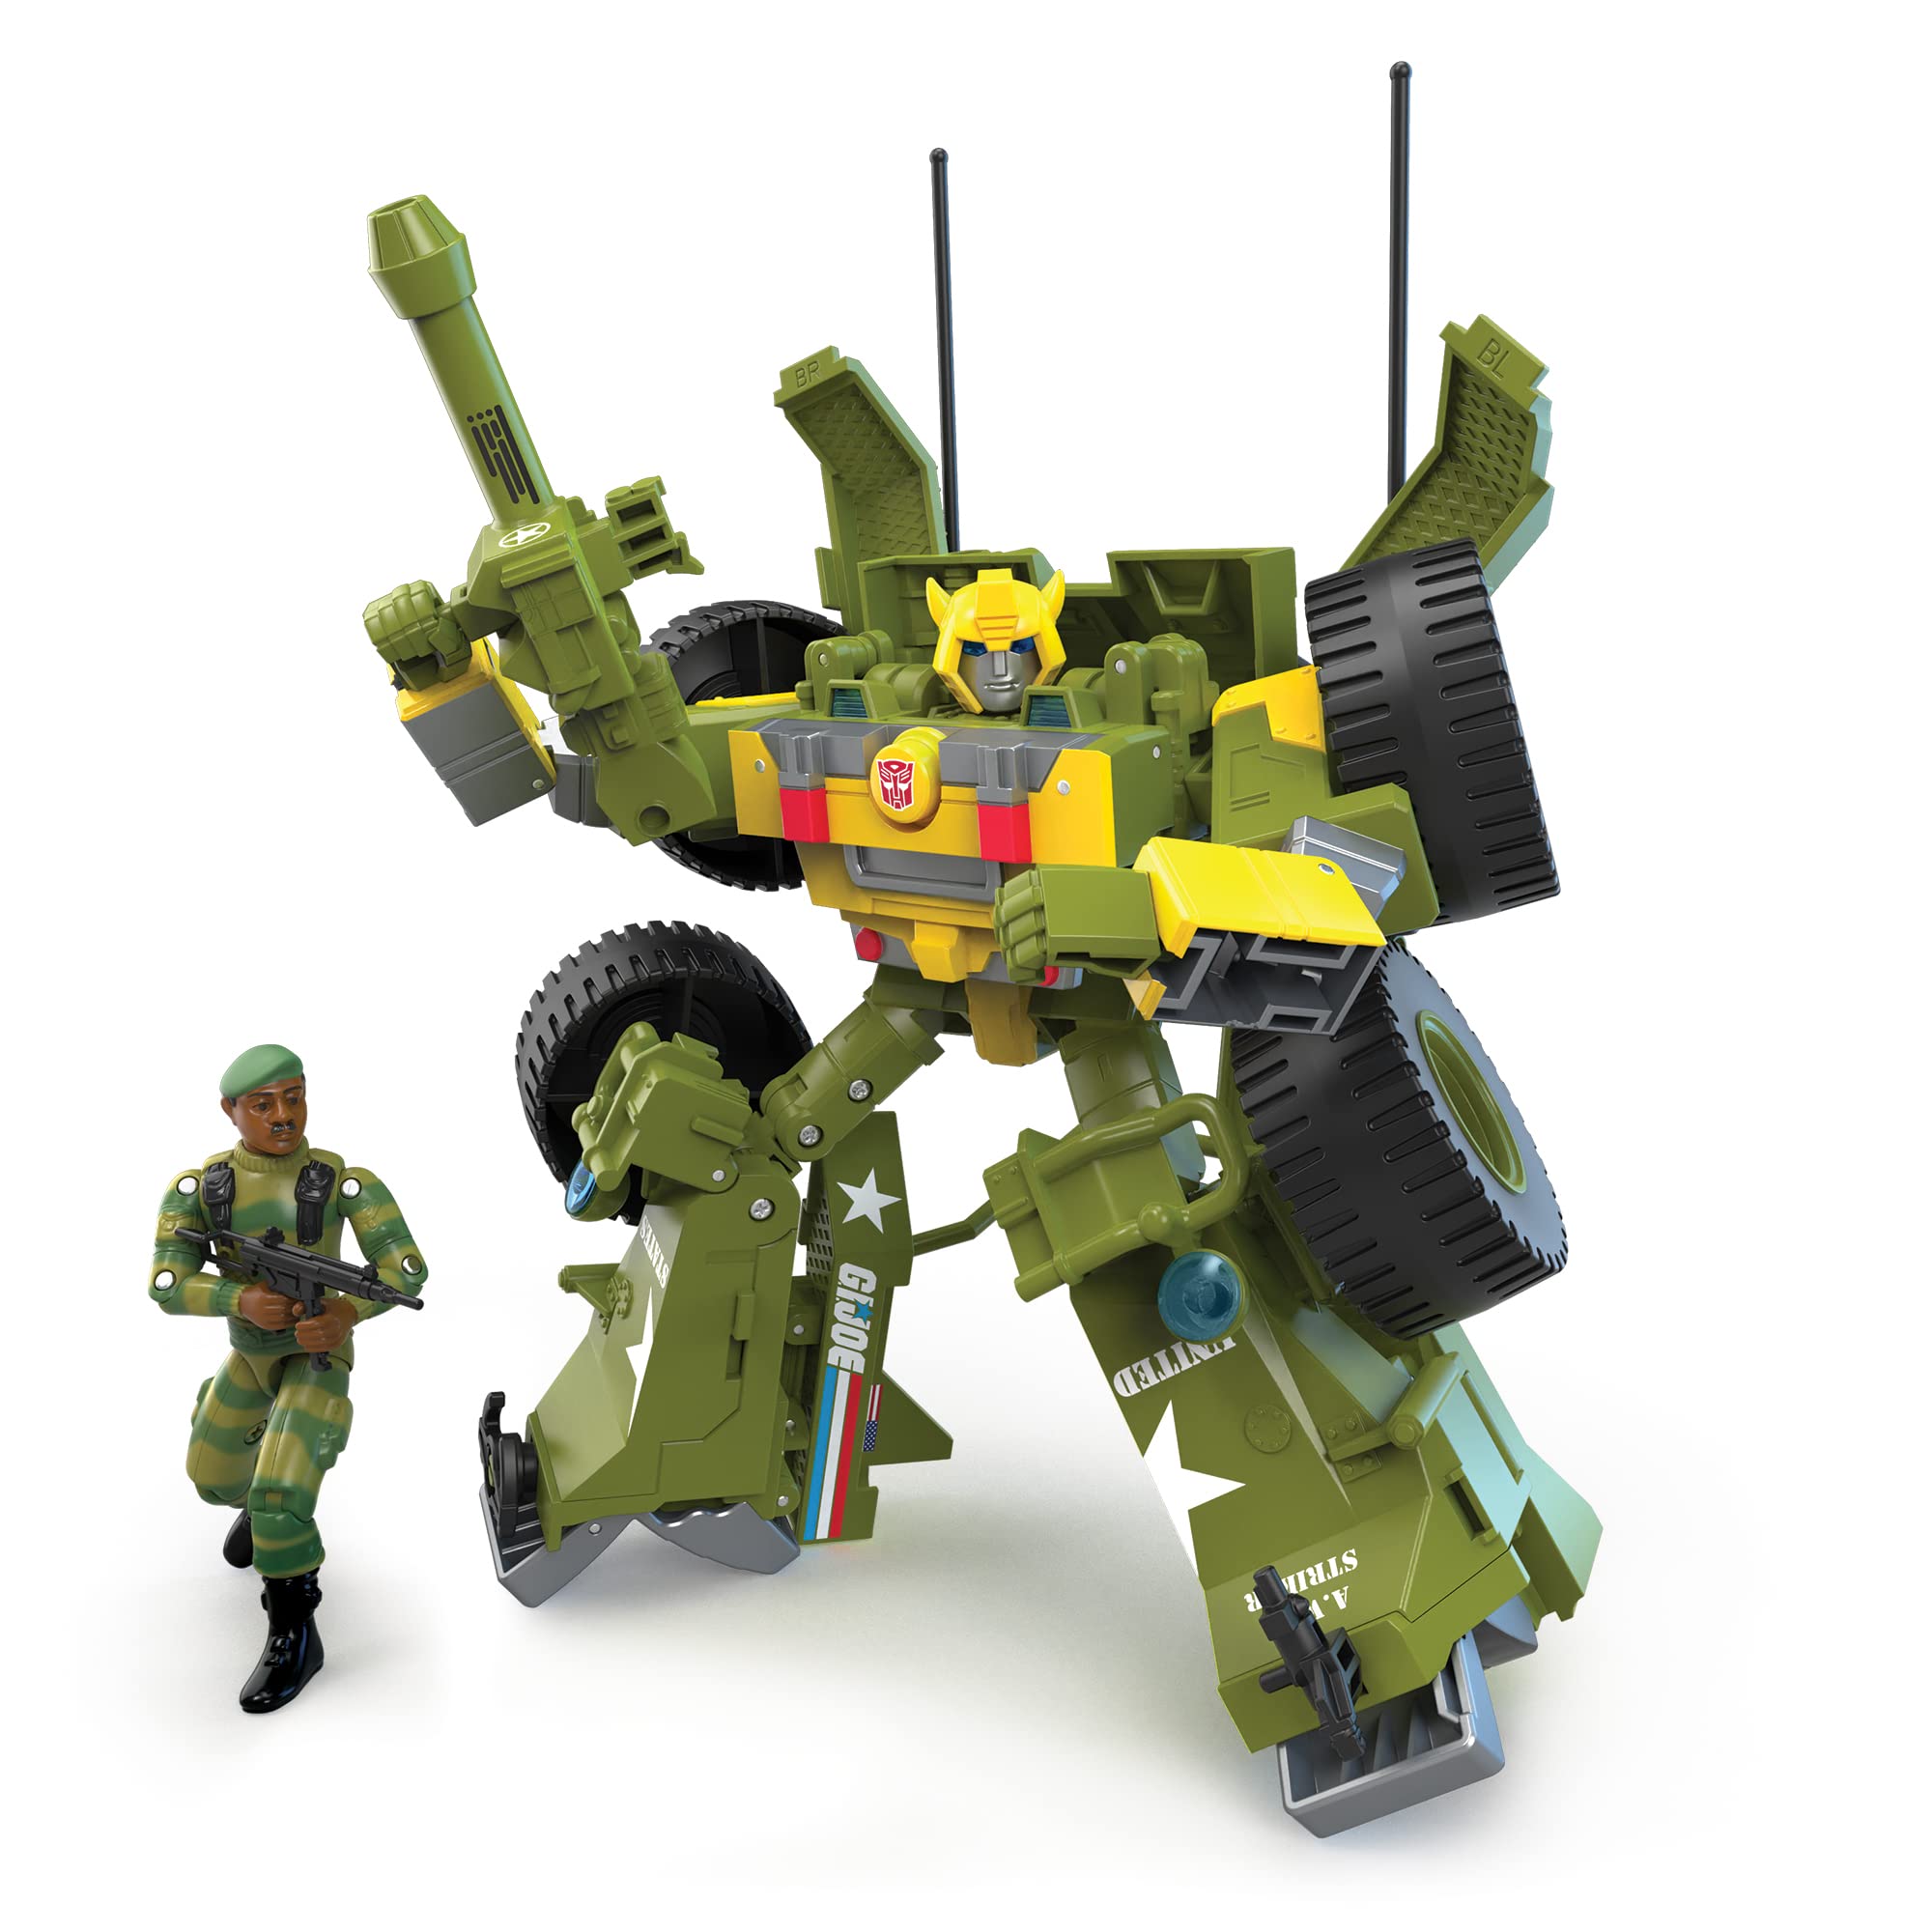 Transformers Generations Collaborative: G.I. Joe Mash-Up Bumblebee A.W.E. Striker & Lonzo “Stalker” Wilkinson Toys, Age 8 and Up, F3985